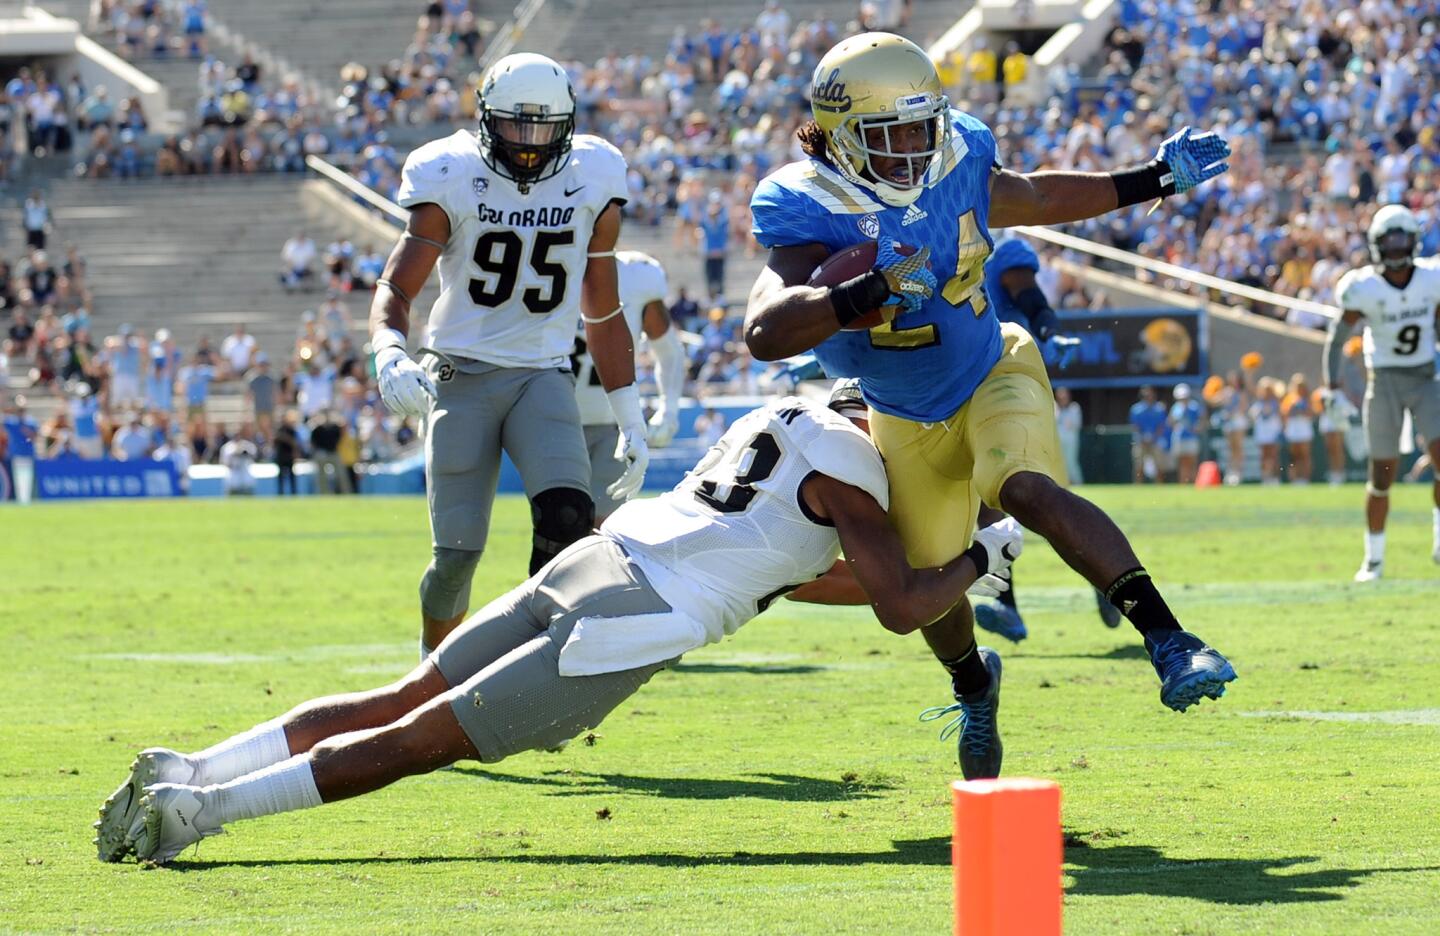 UCLA can't afford a loss to Oregon State on Saturday